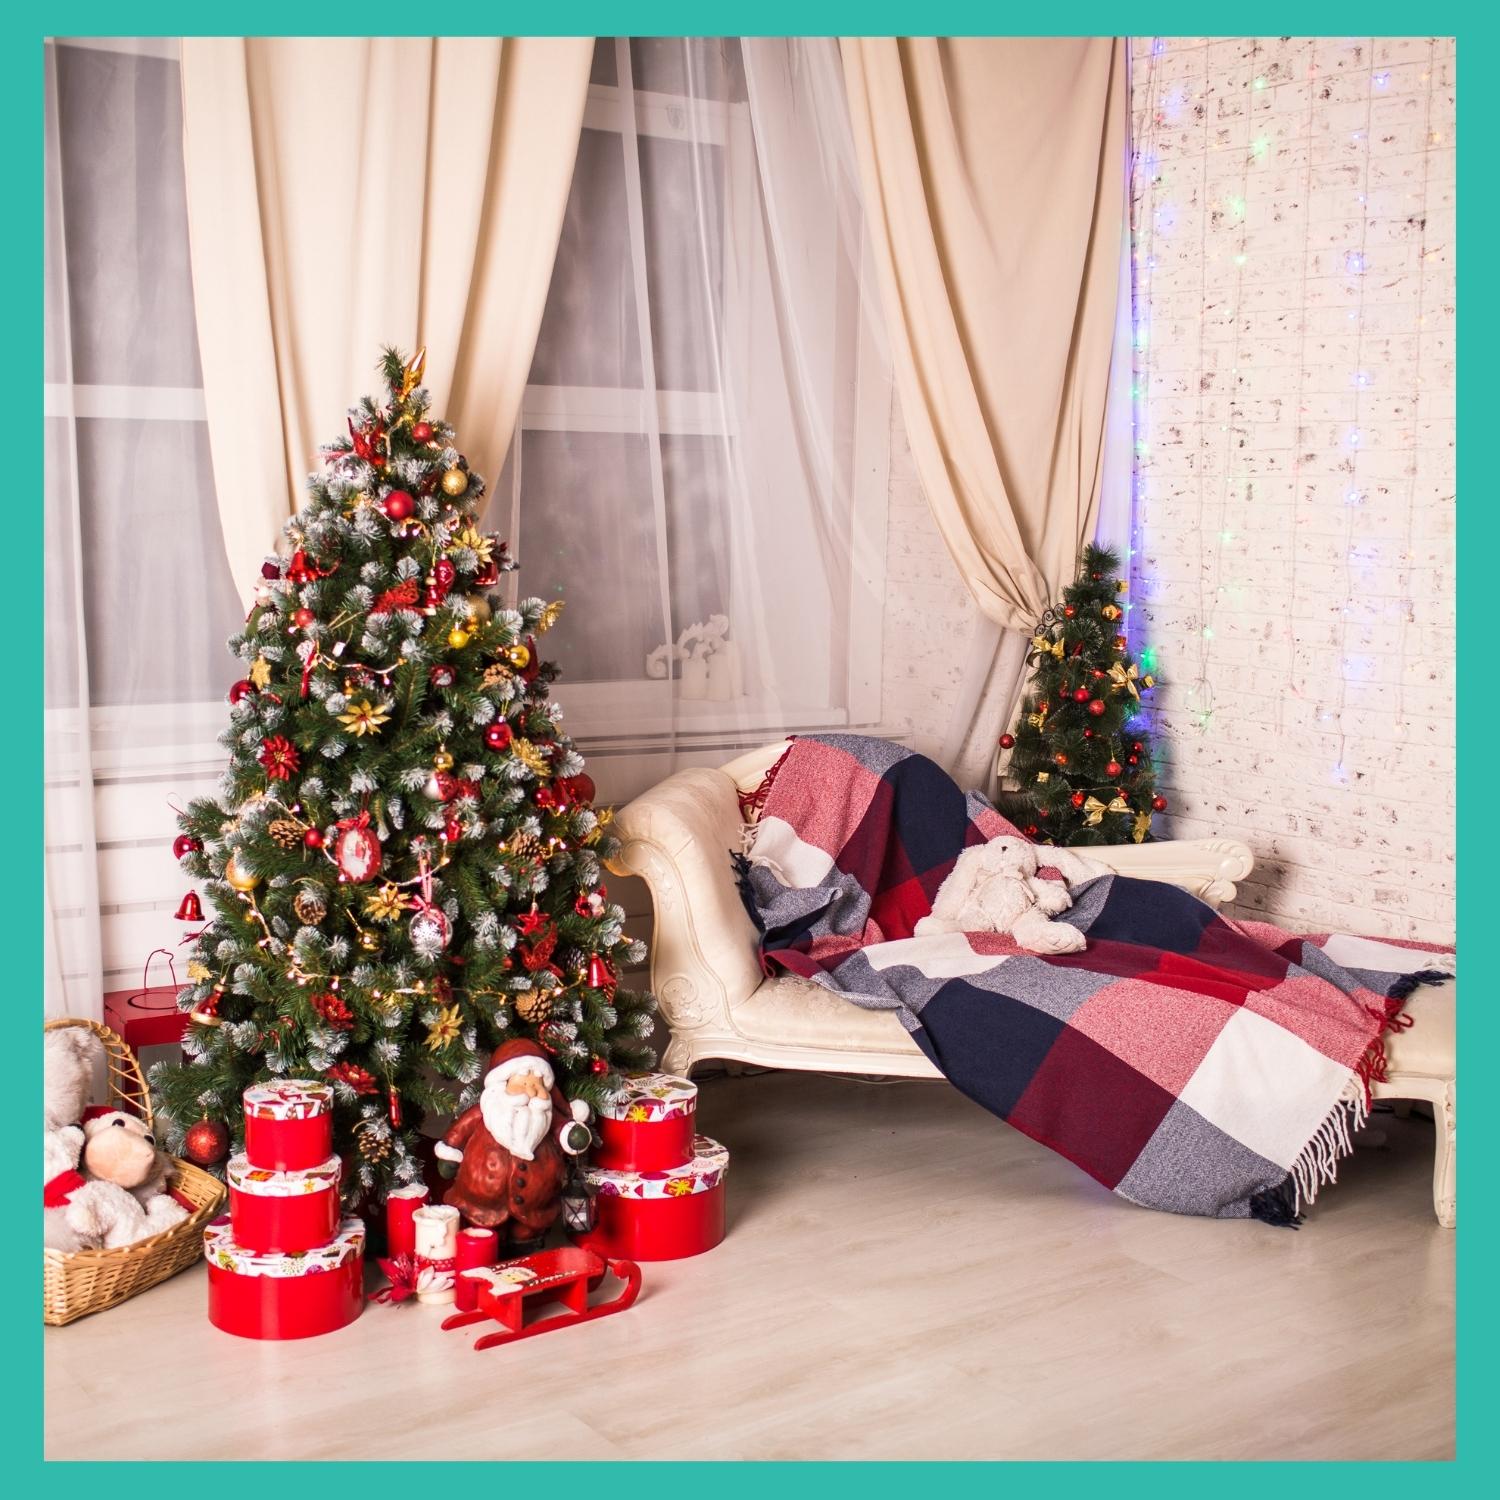 HOW TO DECORATE YOUR HOME FOR CHRISTMAS ON A BUDGET